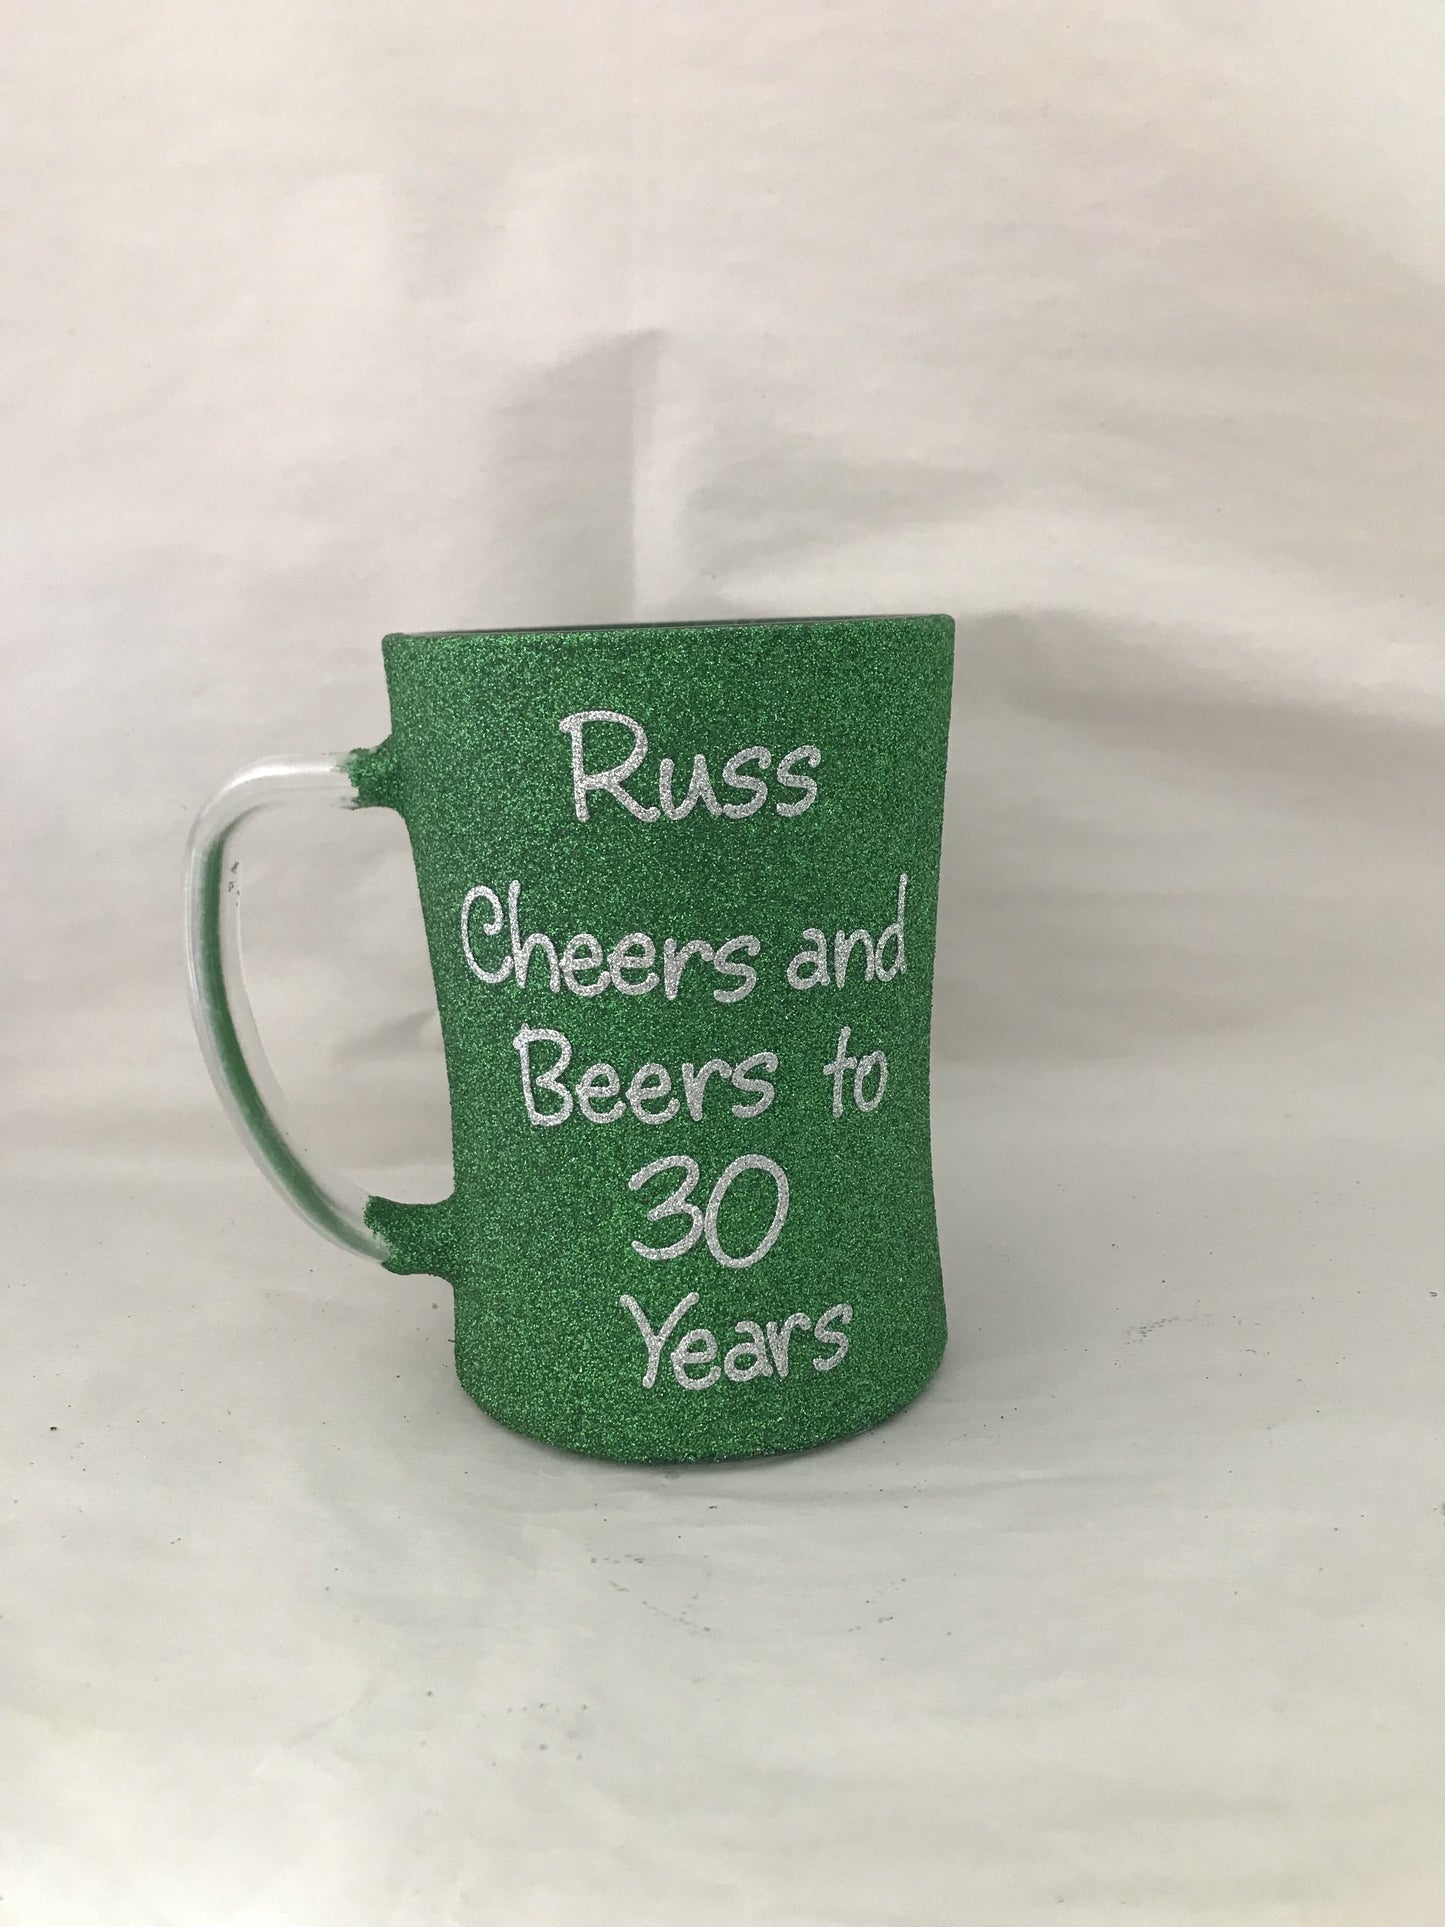 Personalised beer mugs add wording and colour in notes